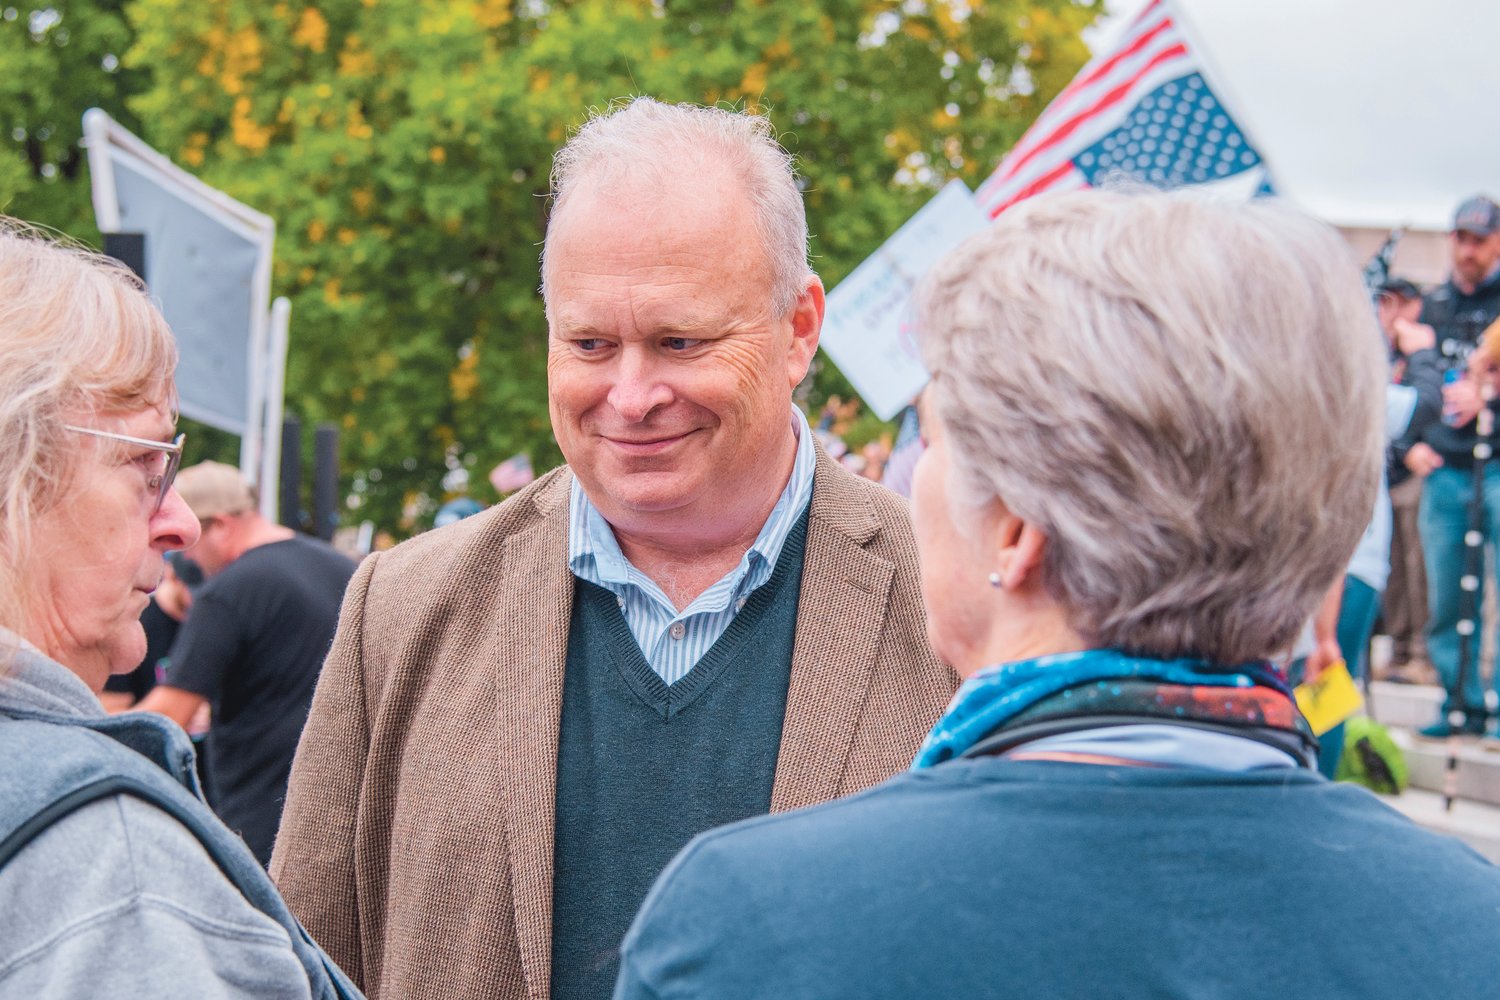 Representative Jim Walsh smiles while mingling with attendees of a “Medical Freedom Rally” outside the Washington State Capitol Building last October.